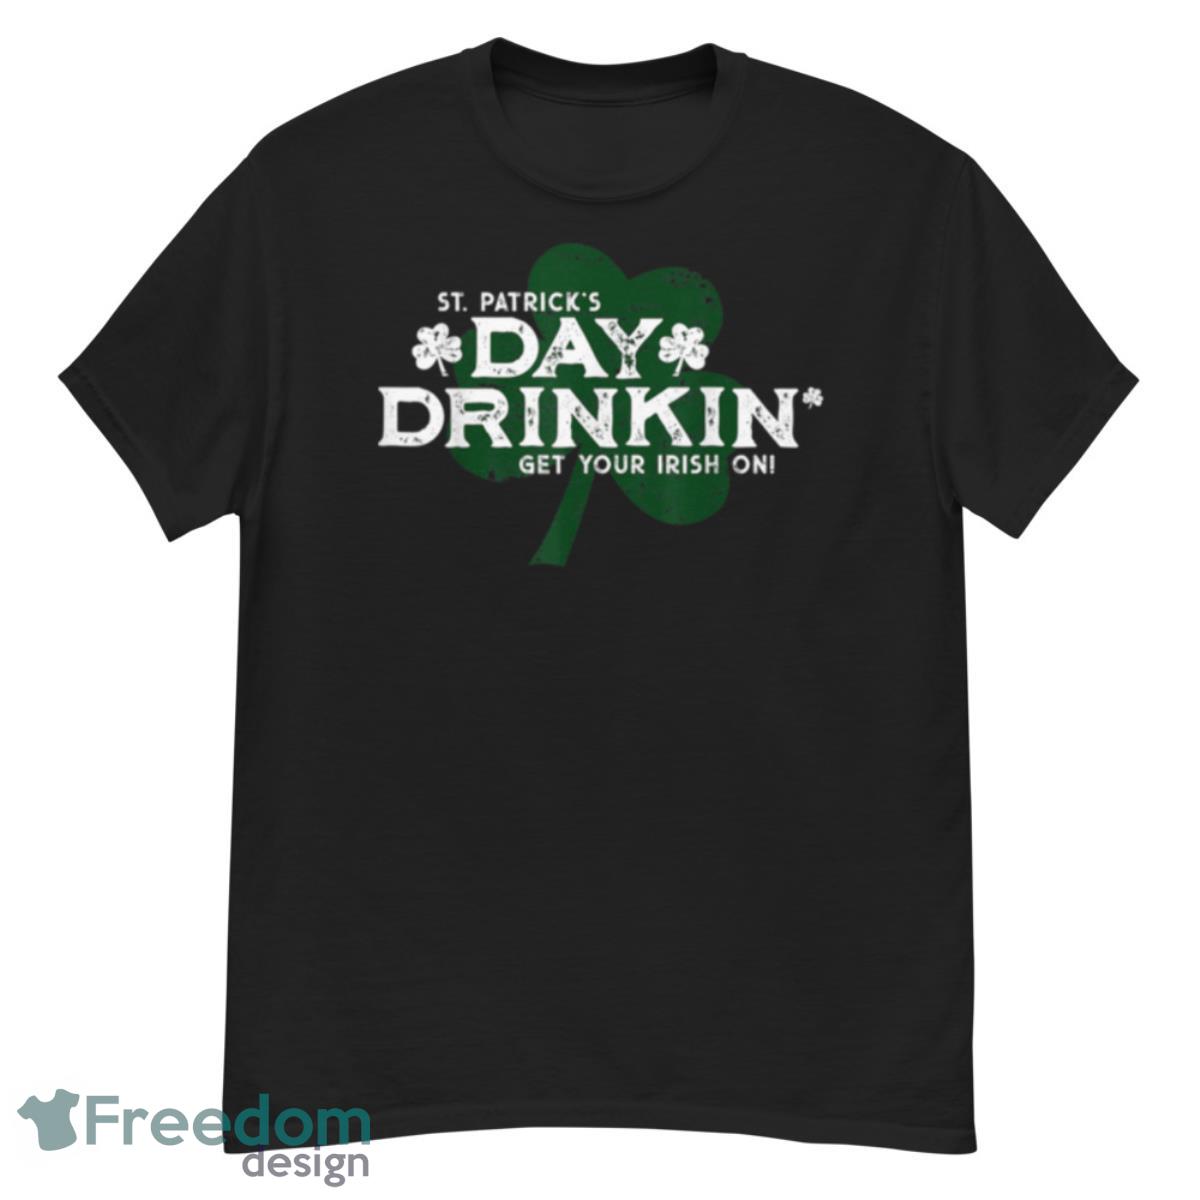 Day Drinking Funny St. Patrick’s Day. T Shirt - G500 Men’s Classic T-Shirt